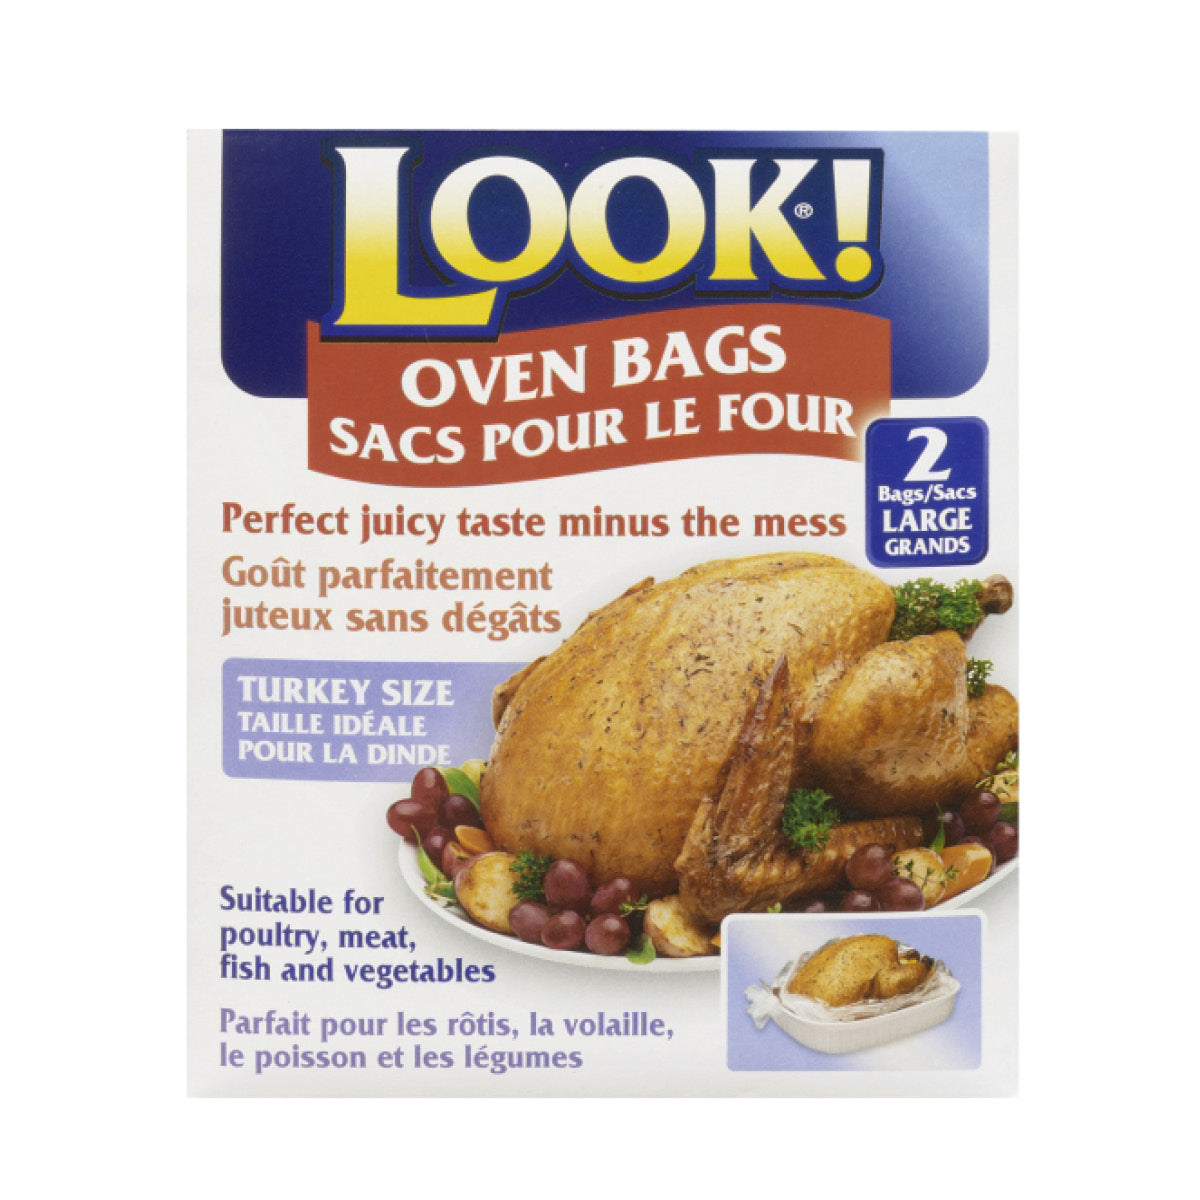 Look Large Oven Bags, 2pk